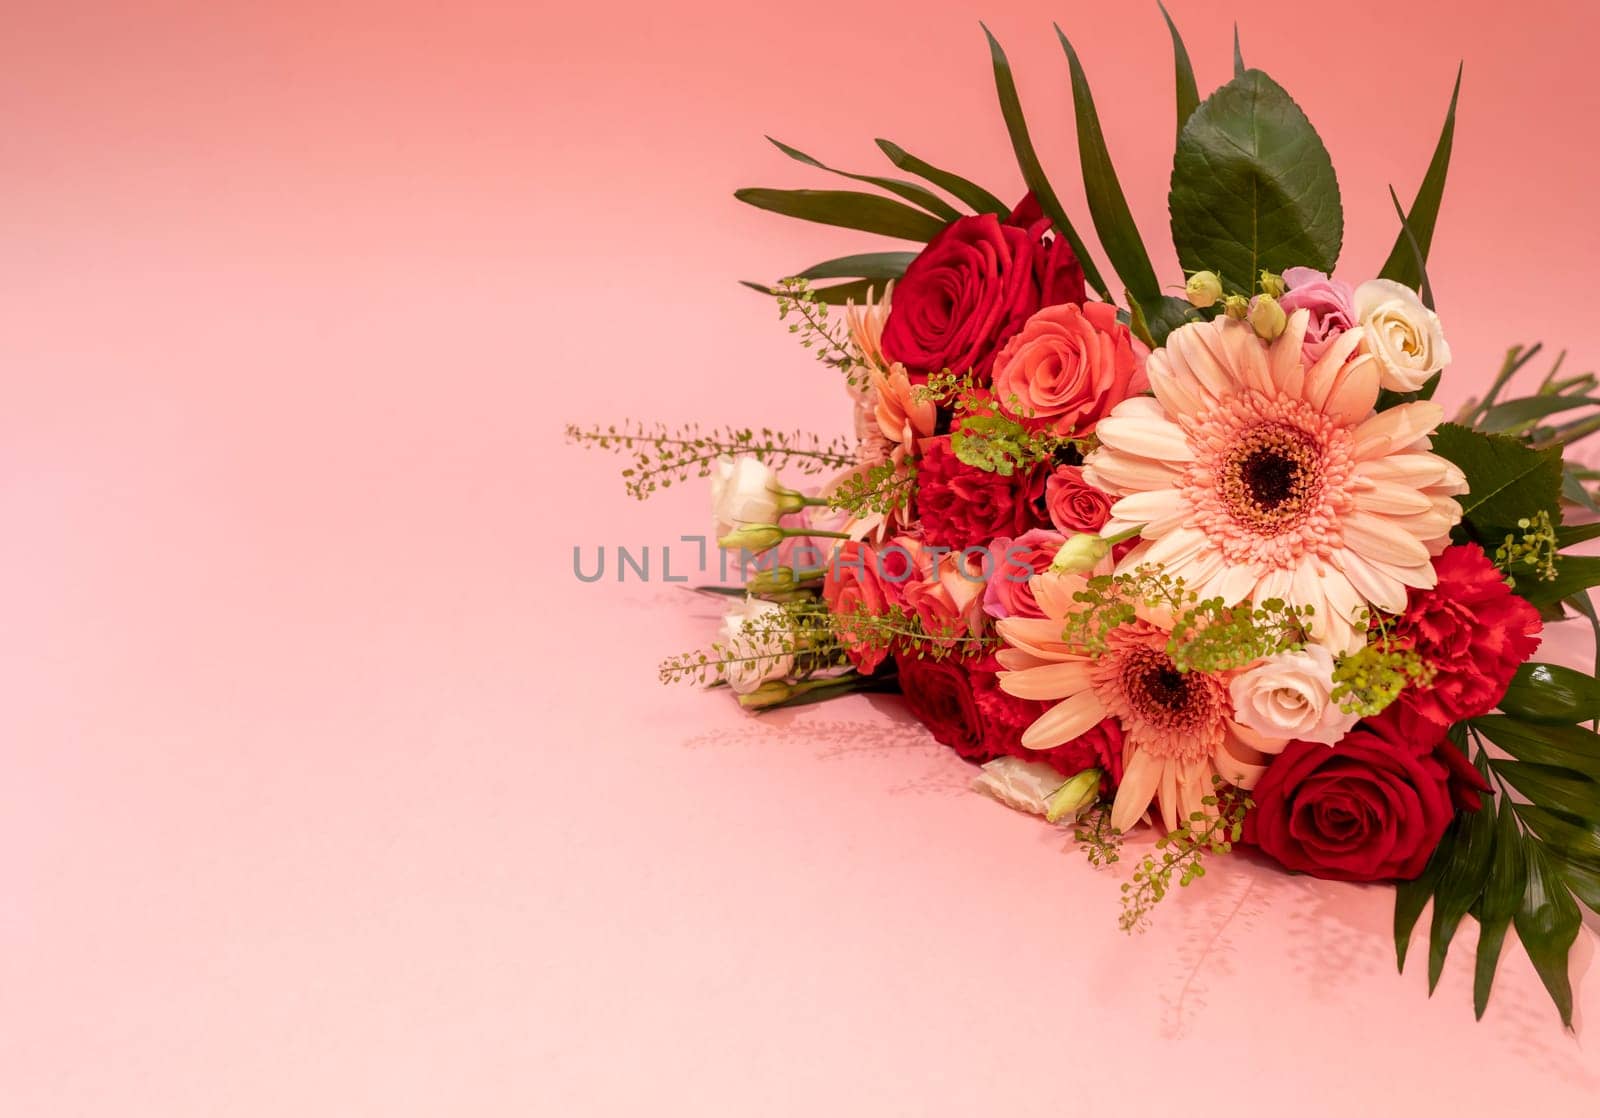 Mockup Beautiful Fresh Bouquet Of Flowers On Pinsk Background. Colorful Mixed Roses, Carnation Shabot, Green Leaves, Gerber. Horizontal Plane, Copy Space For Text by netatsi